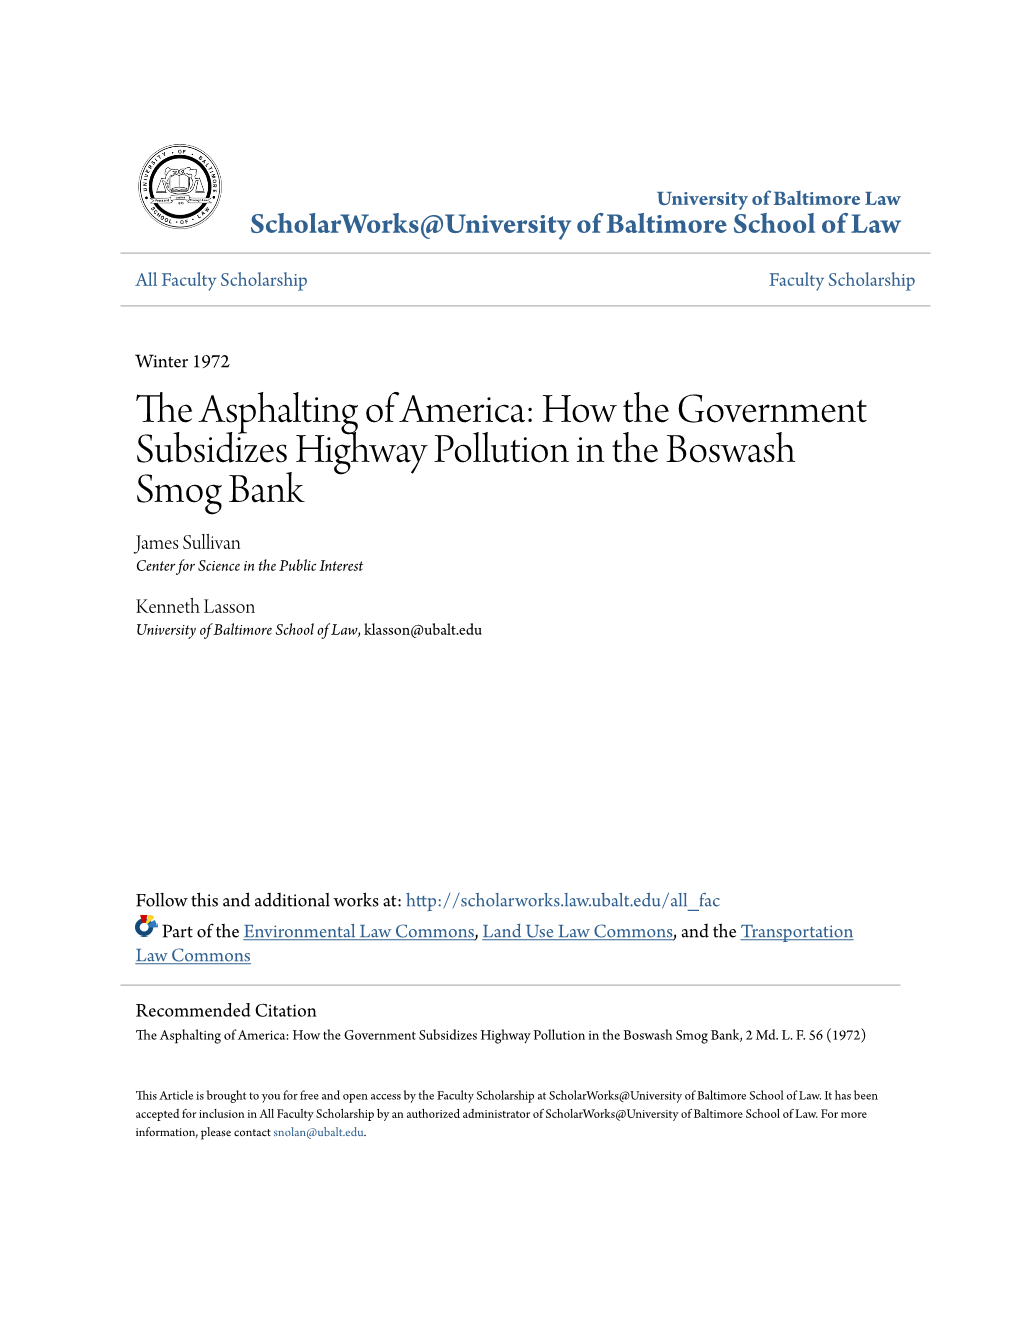 The Asphalting of America: How the Government Subsidizes Highway Pollution in the Boswash Smog Bank James Sullivan Center for Science in the Public Interest